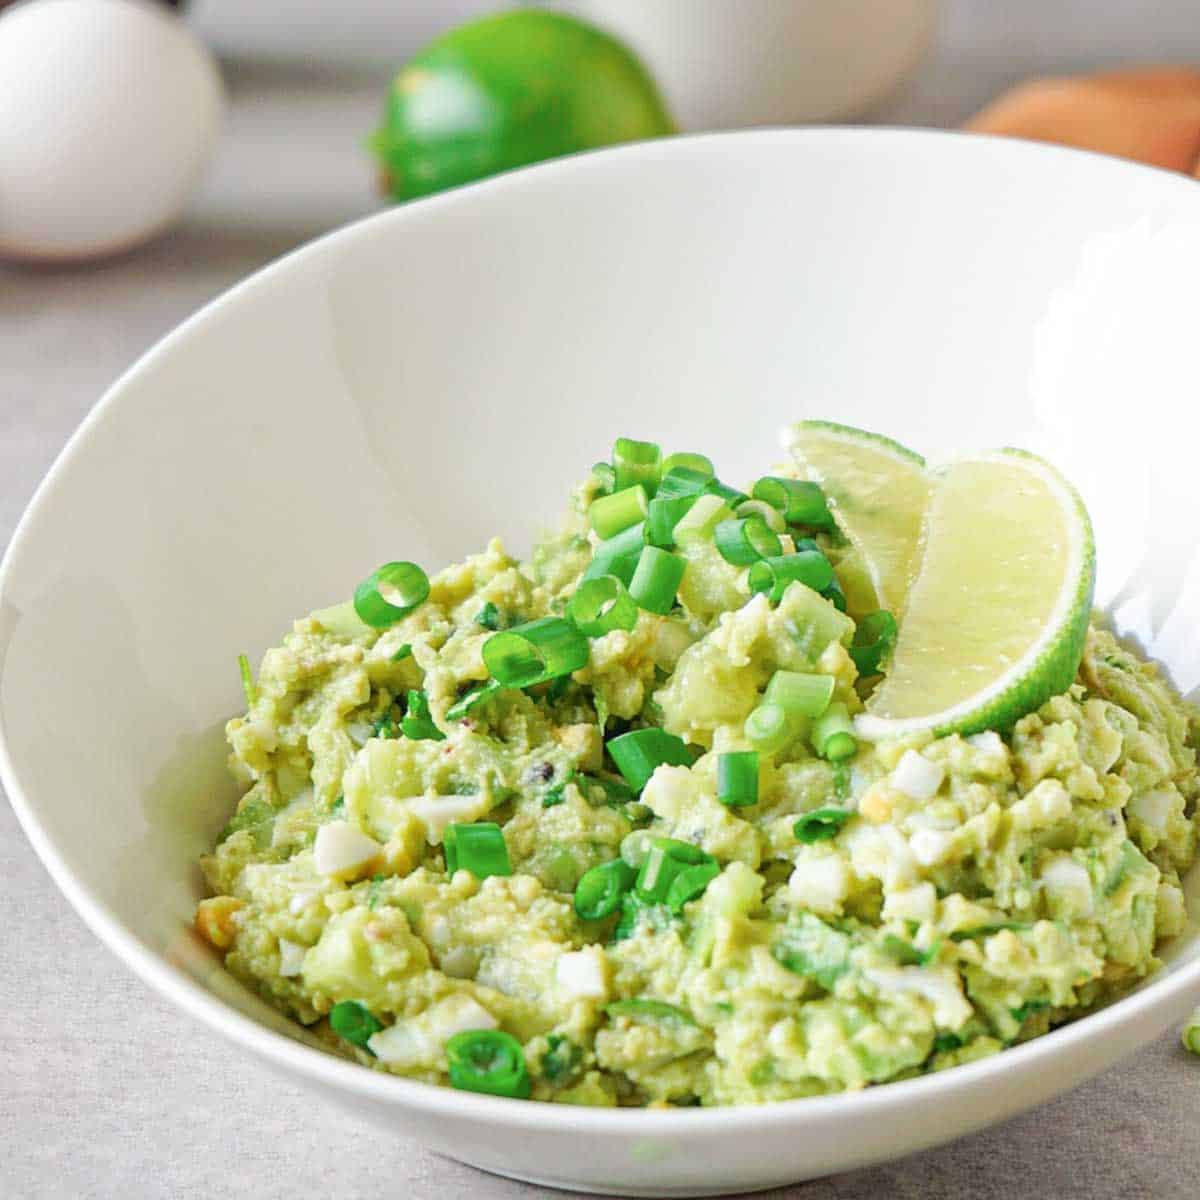 A white porcelain bowl with avocado egg salad garnished with chopped green onions and lime wedges.